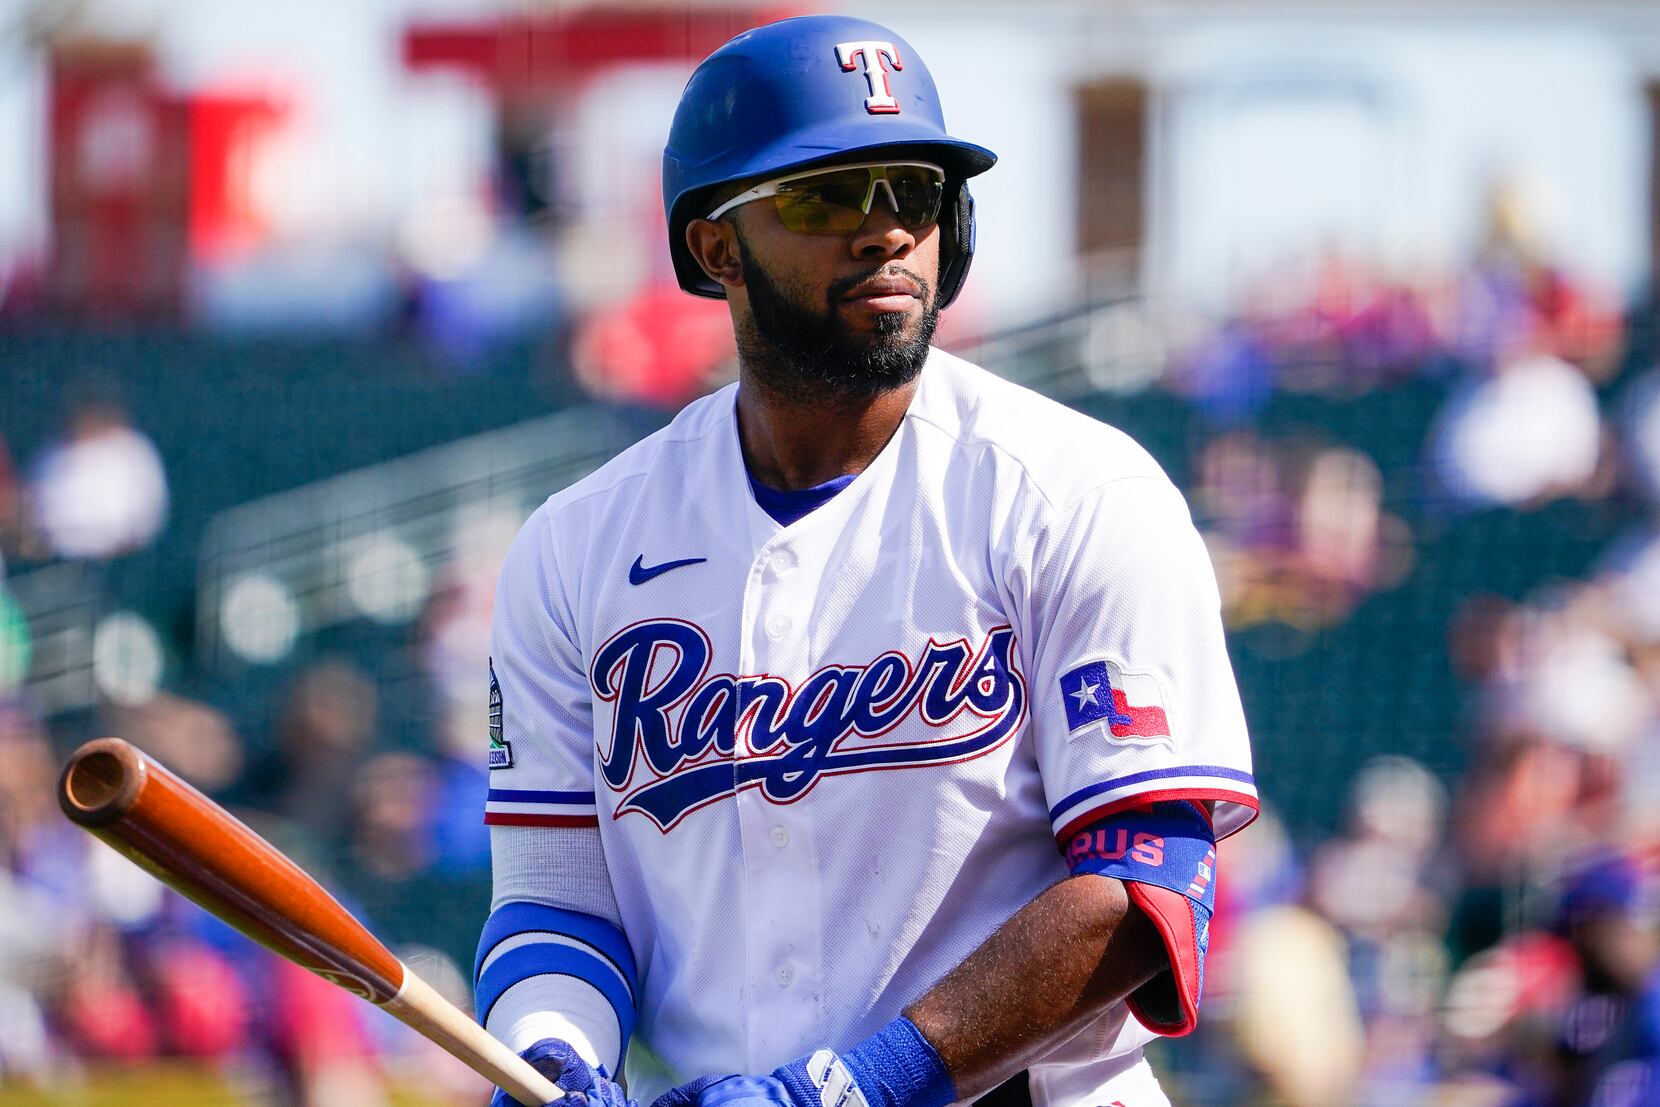 Here is the most concerning element of Elvis Andrus' struggles with the  Rangers in 2018